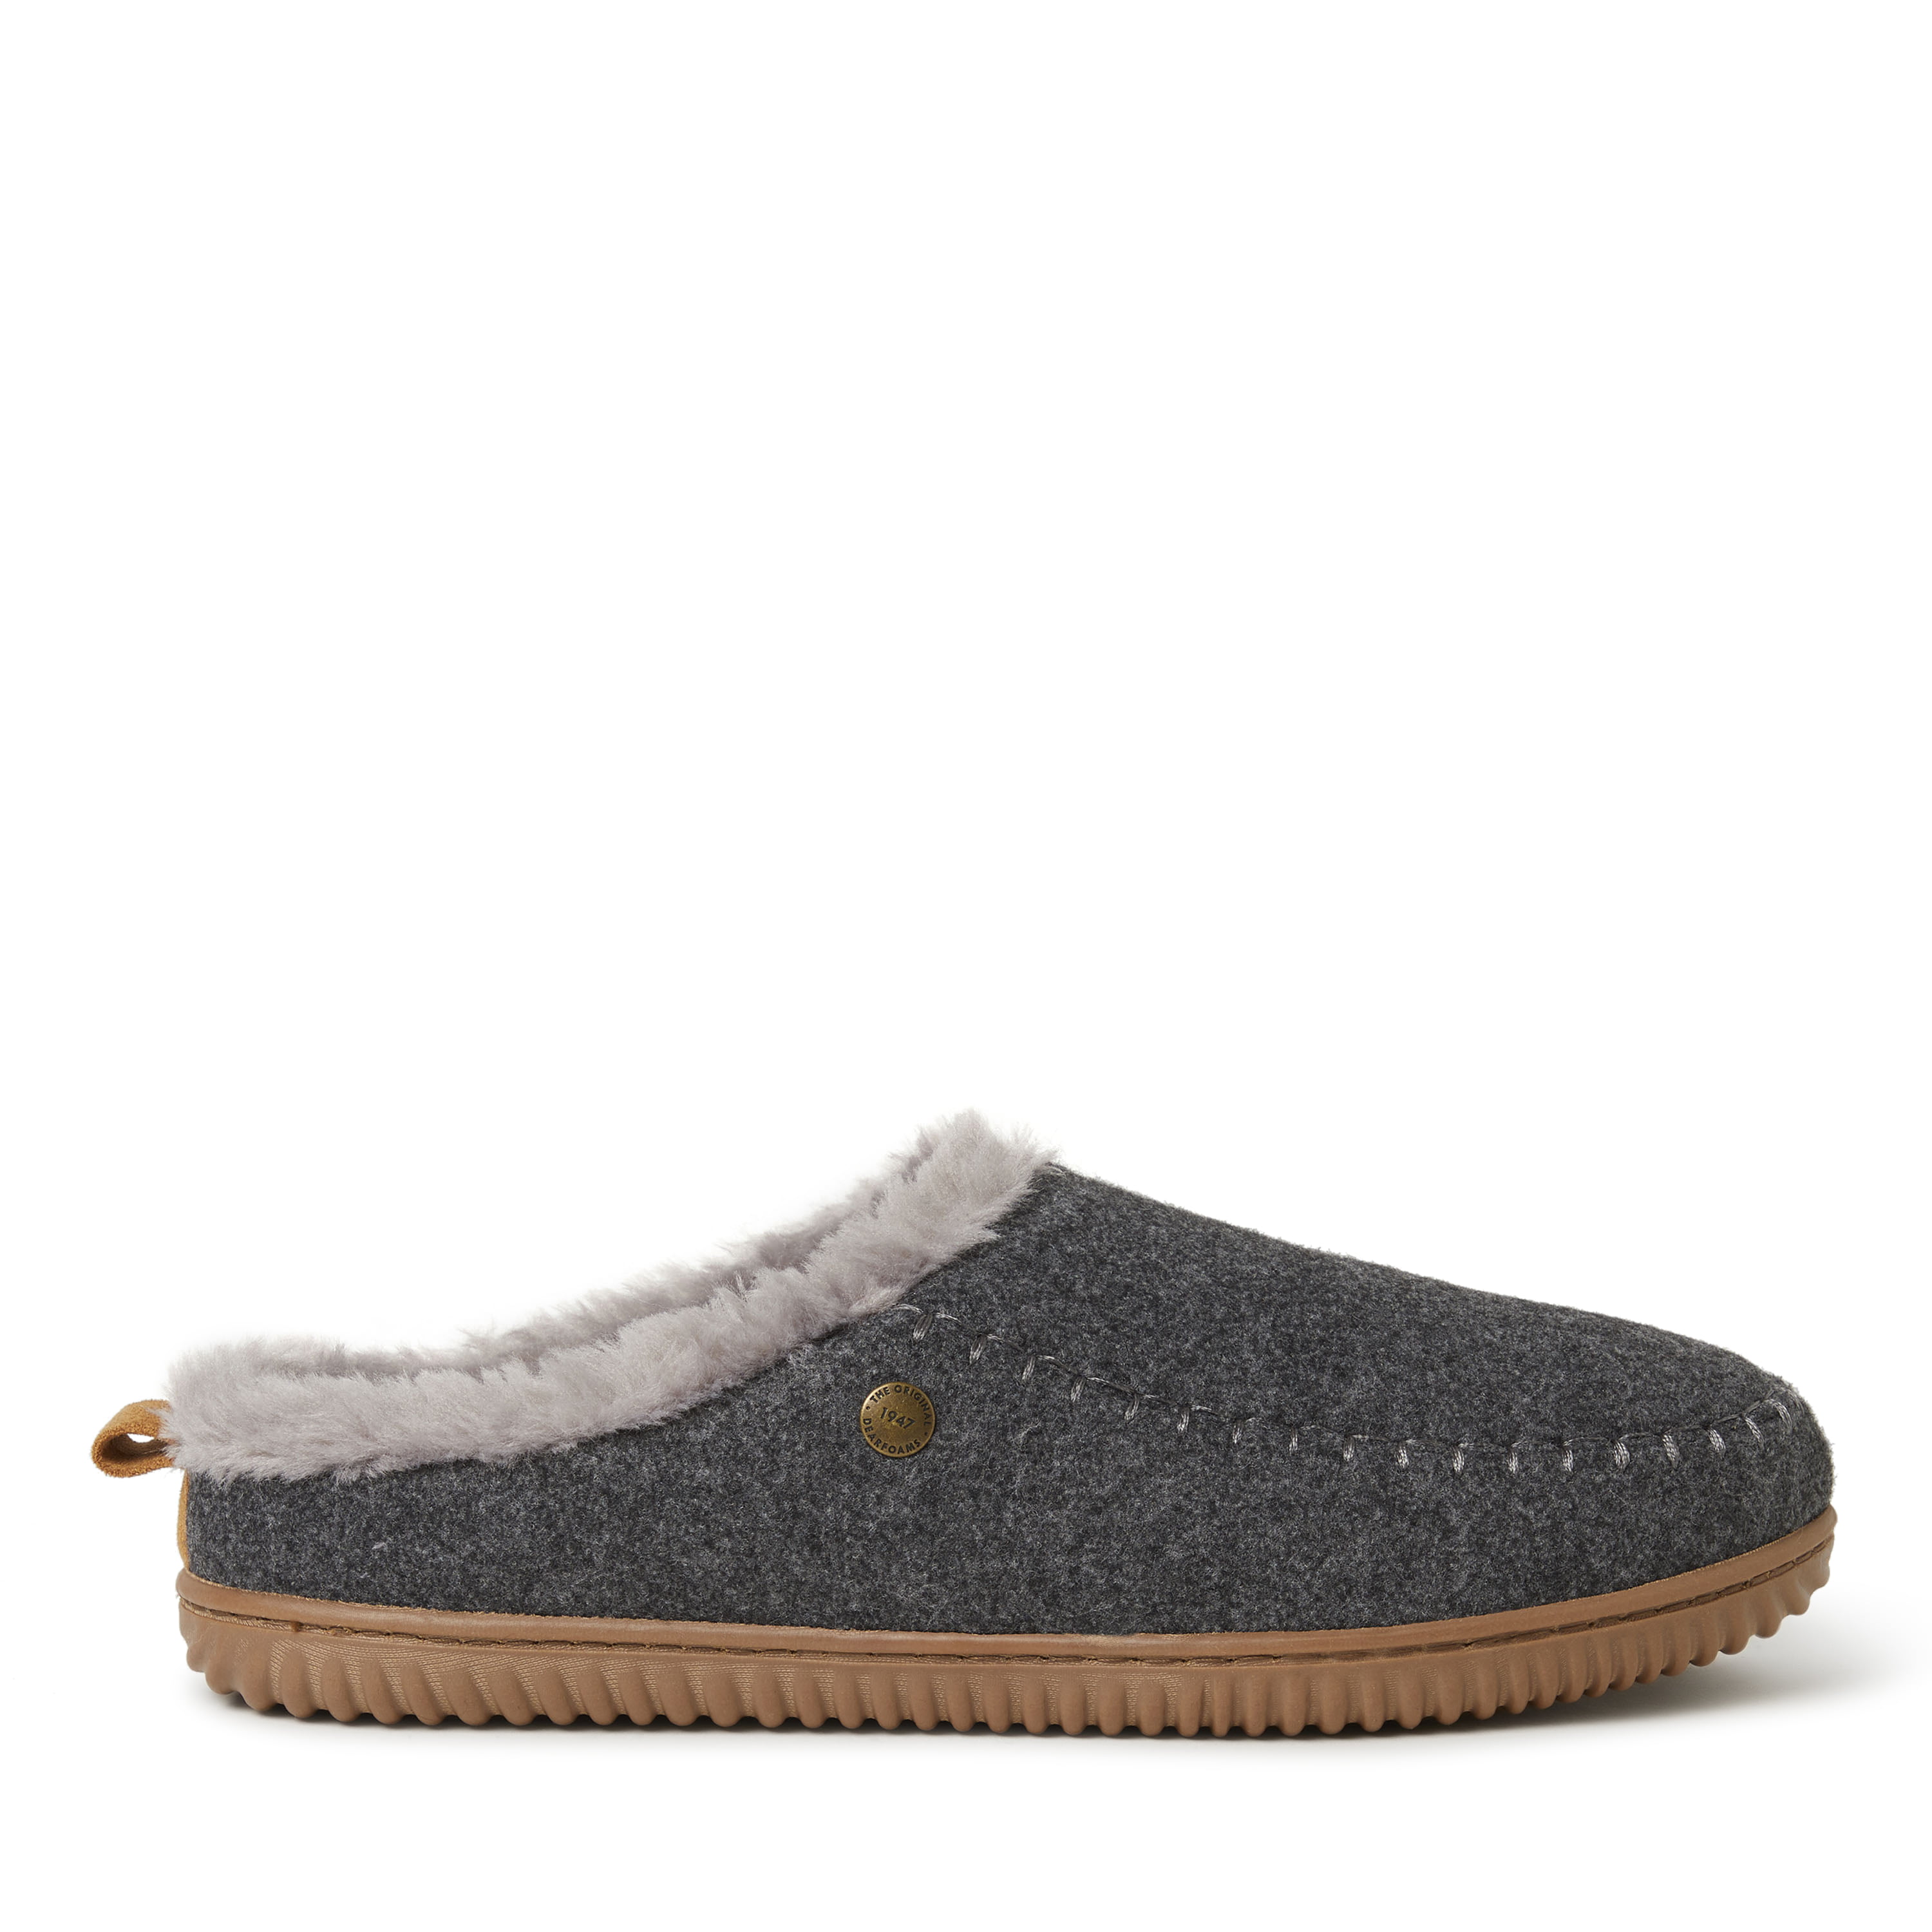 dearfoam slippers with arch support